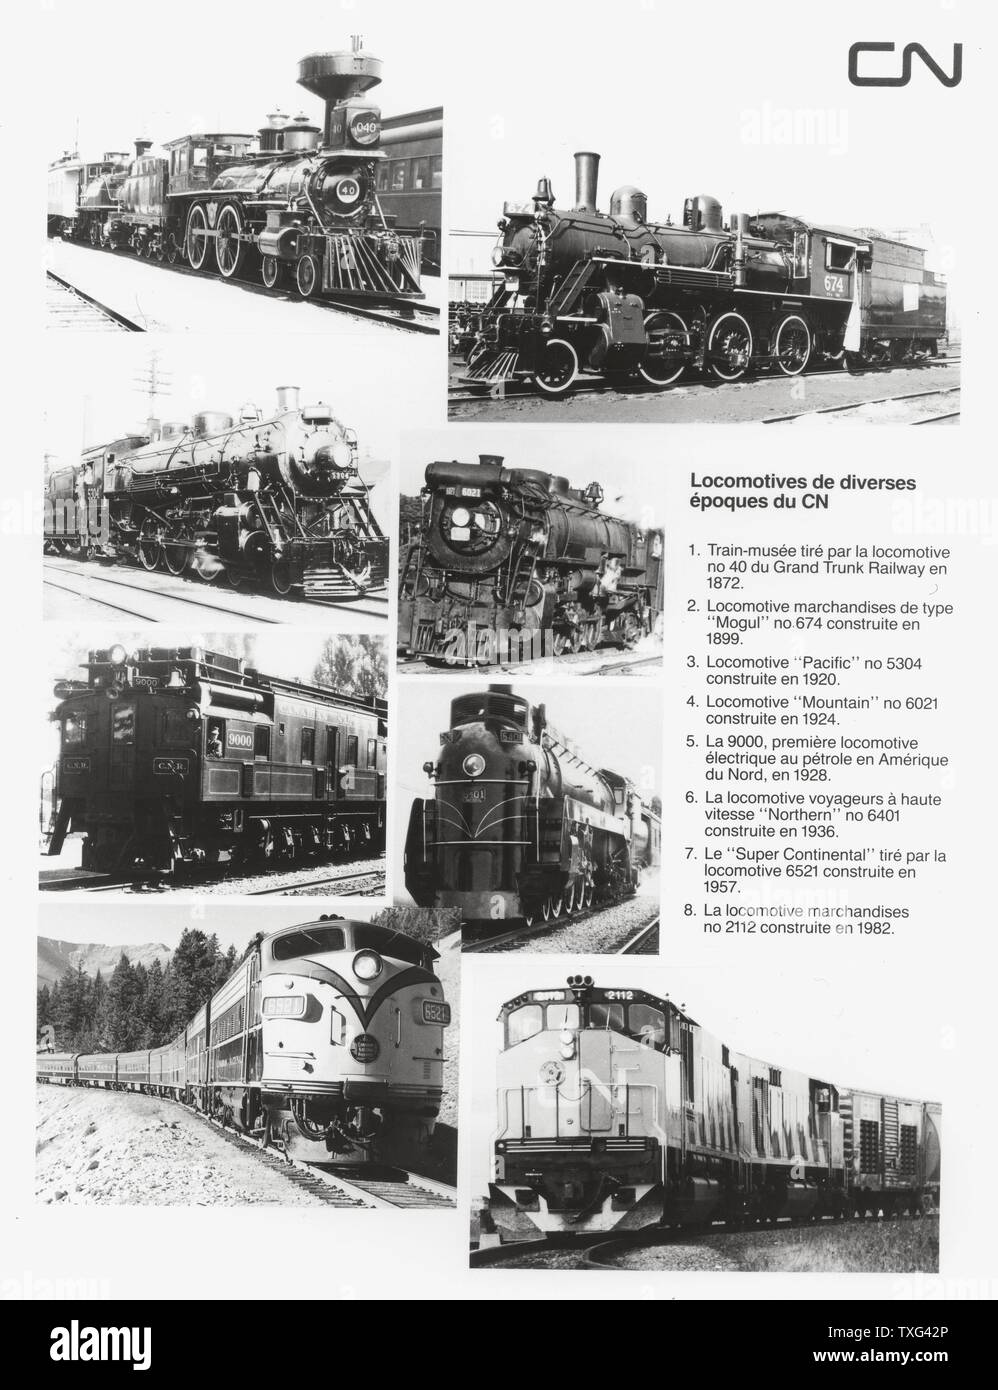 Locomotives from various periods operated by the Canadian National Railway (CN). 1. Museum train pulled by locomotive No. 40 of the Grand Trunk Railway in 1872. 2. Freight locomotive type 'Mogul' n°674 built in 1899. 3. Pacific' locomotive n°5304 built in 1920. 4. Mountain' locomotive n°6021 built in 1924. 5. The 9000, the first petroleum electric locomotive in North America, in 1928. 6. High-speed passenger locomotive 'Northern' No. 6401 built in 1936. 7. The 'Super Continental' pulled by locomotive 6521 built in 1957. 8. The freight locomotive n°2112 was built in 1982. Stock Photo